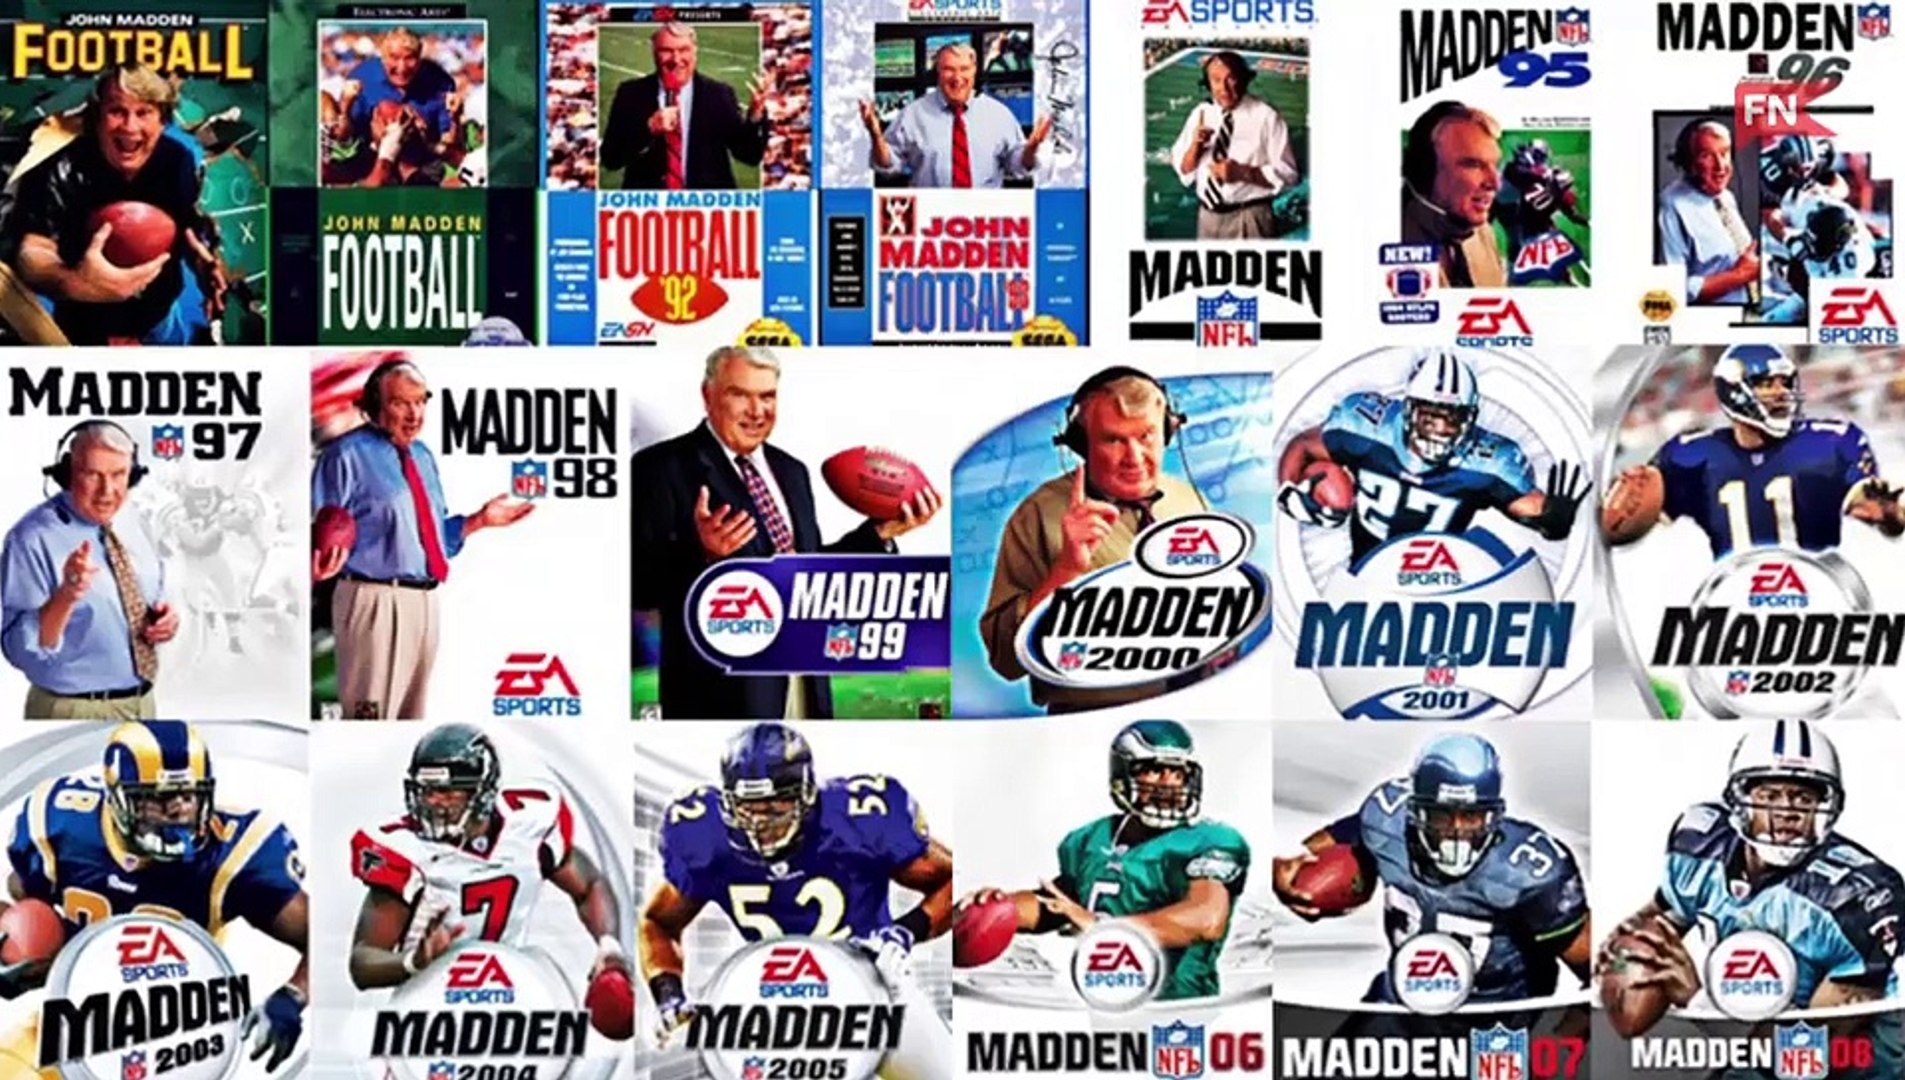 John Madden to Appear on the Cover of Madden 23 - video Dailymotion